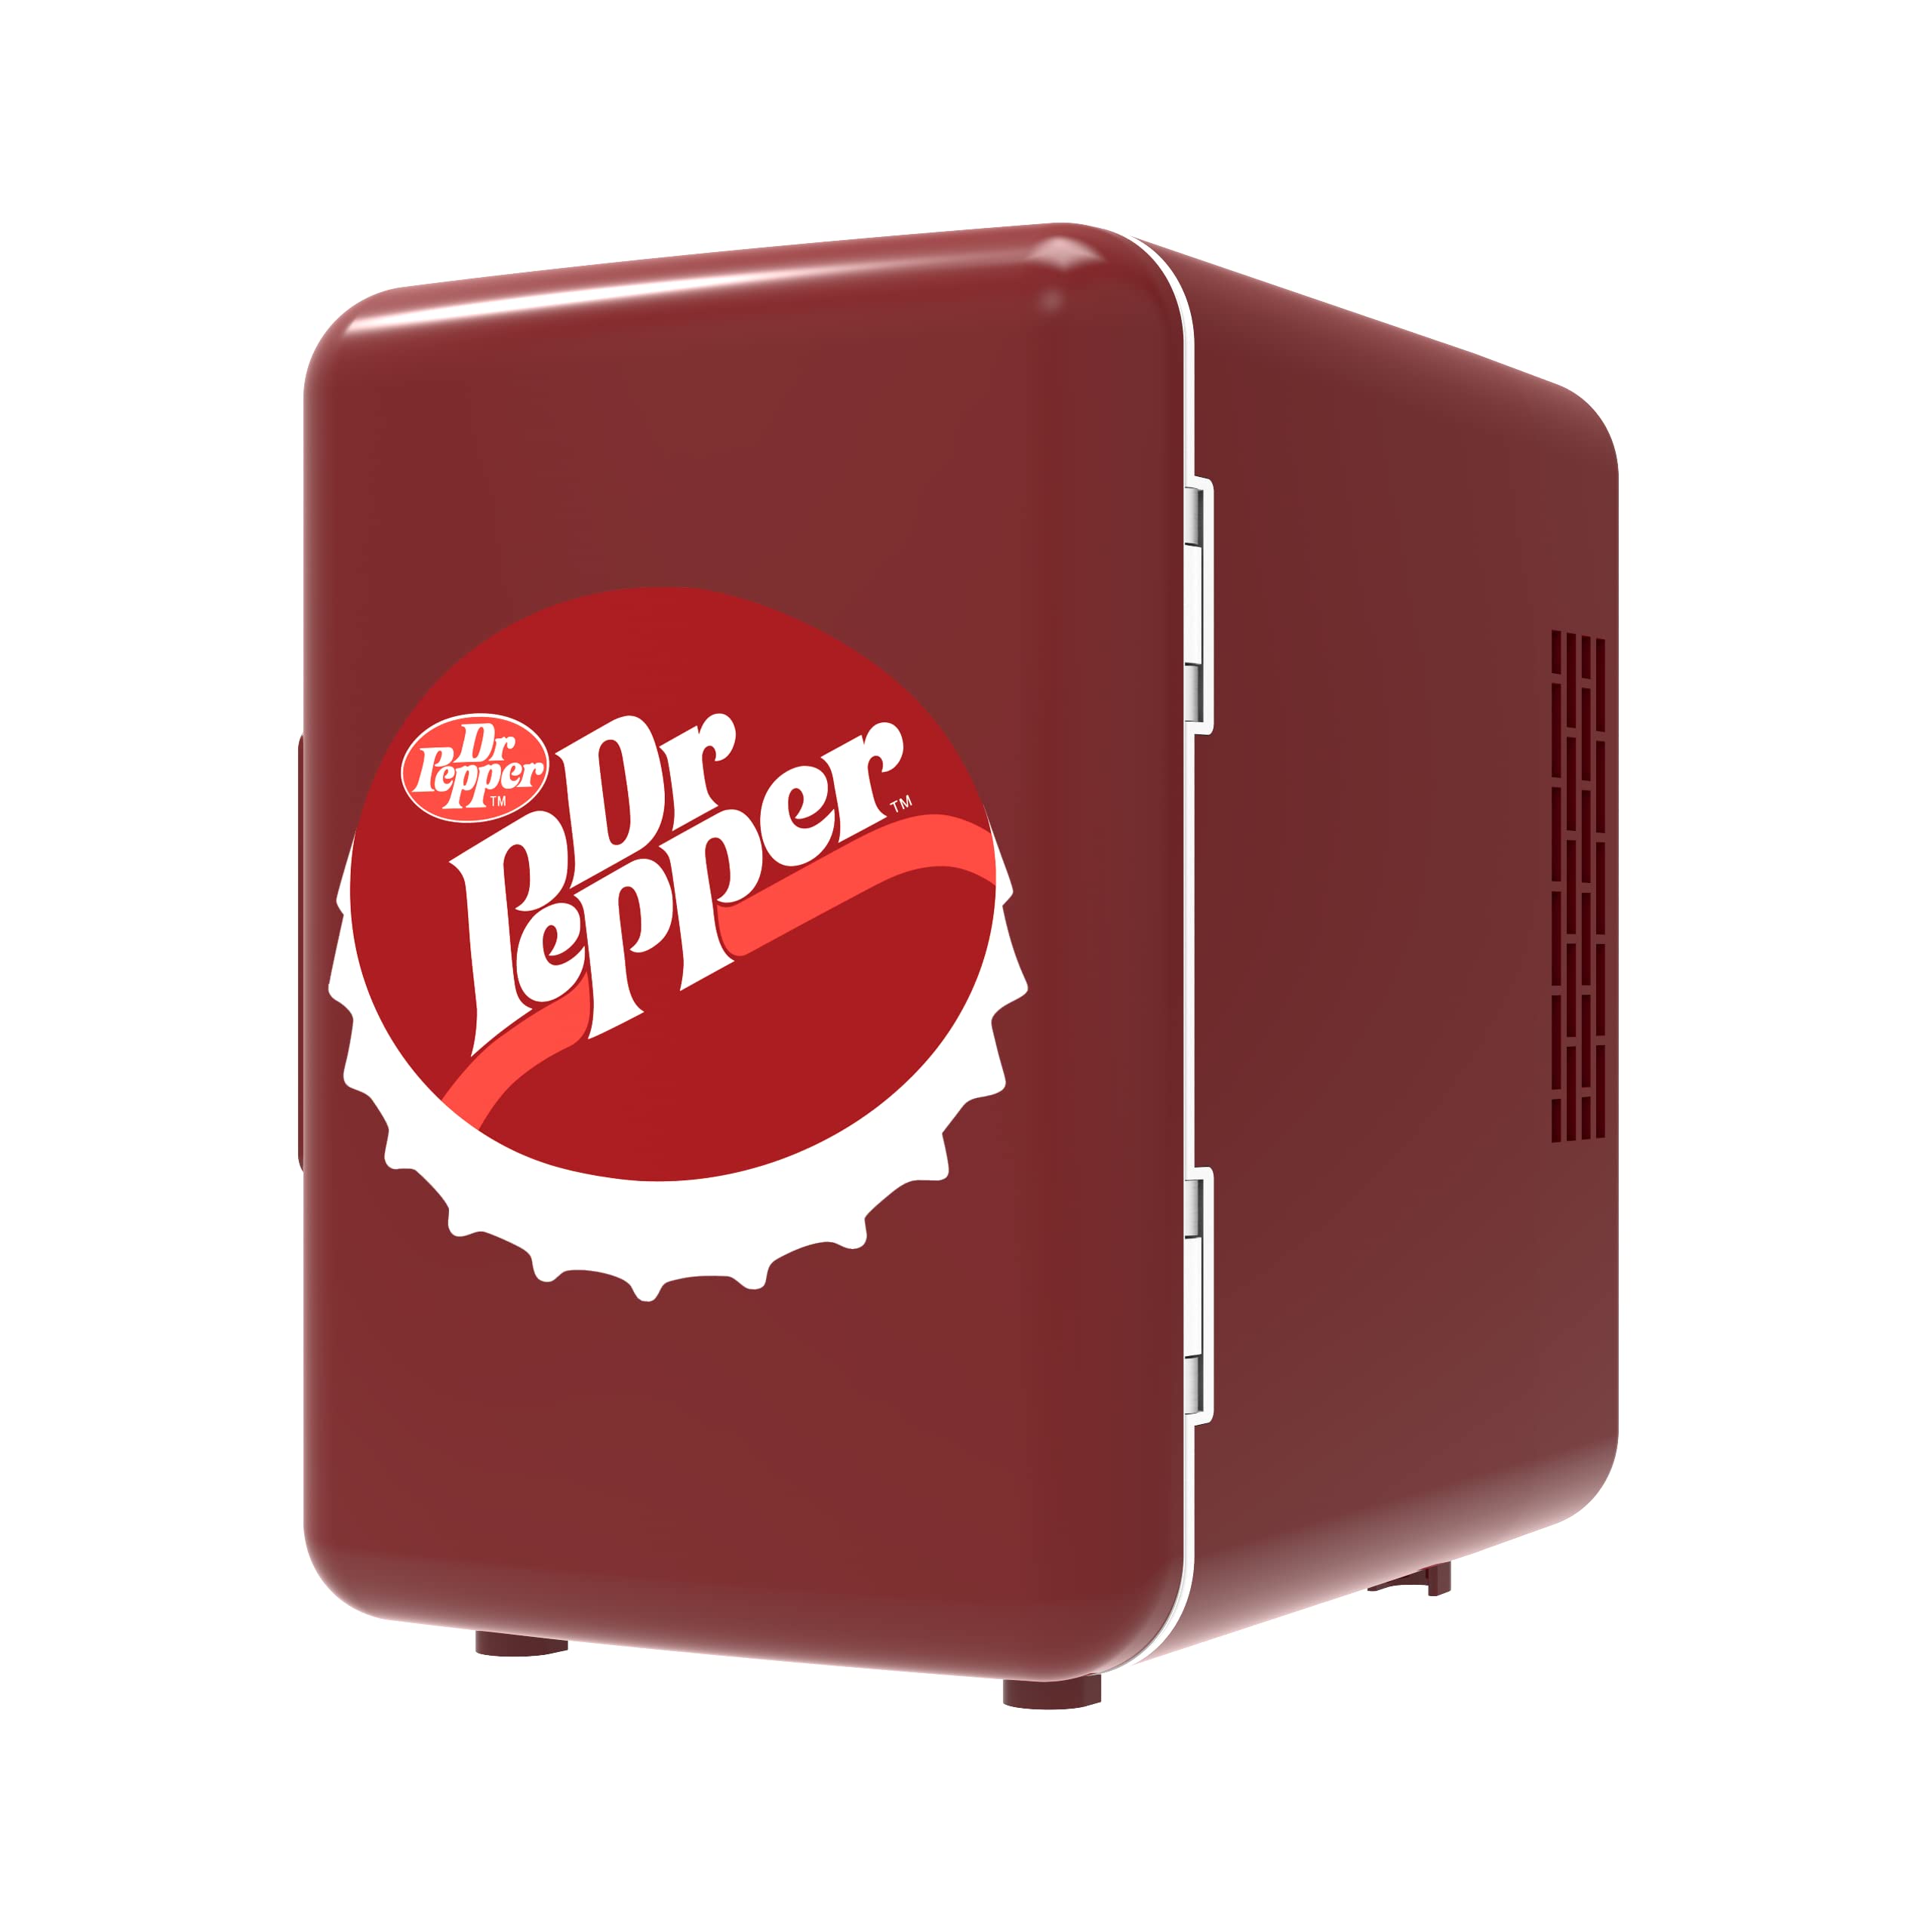 CURTIS MIS153DRP Dr. Pepper Retro Mini Portable Compact Personal Fridge Cooler, 4 Liter Capacity, 6 Cans, Makeup, Skincare, Freon-Free & Eco Friendly, Maroon